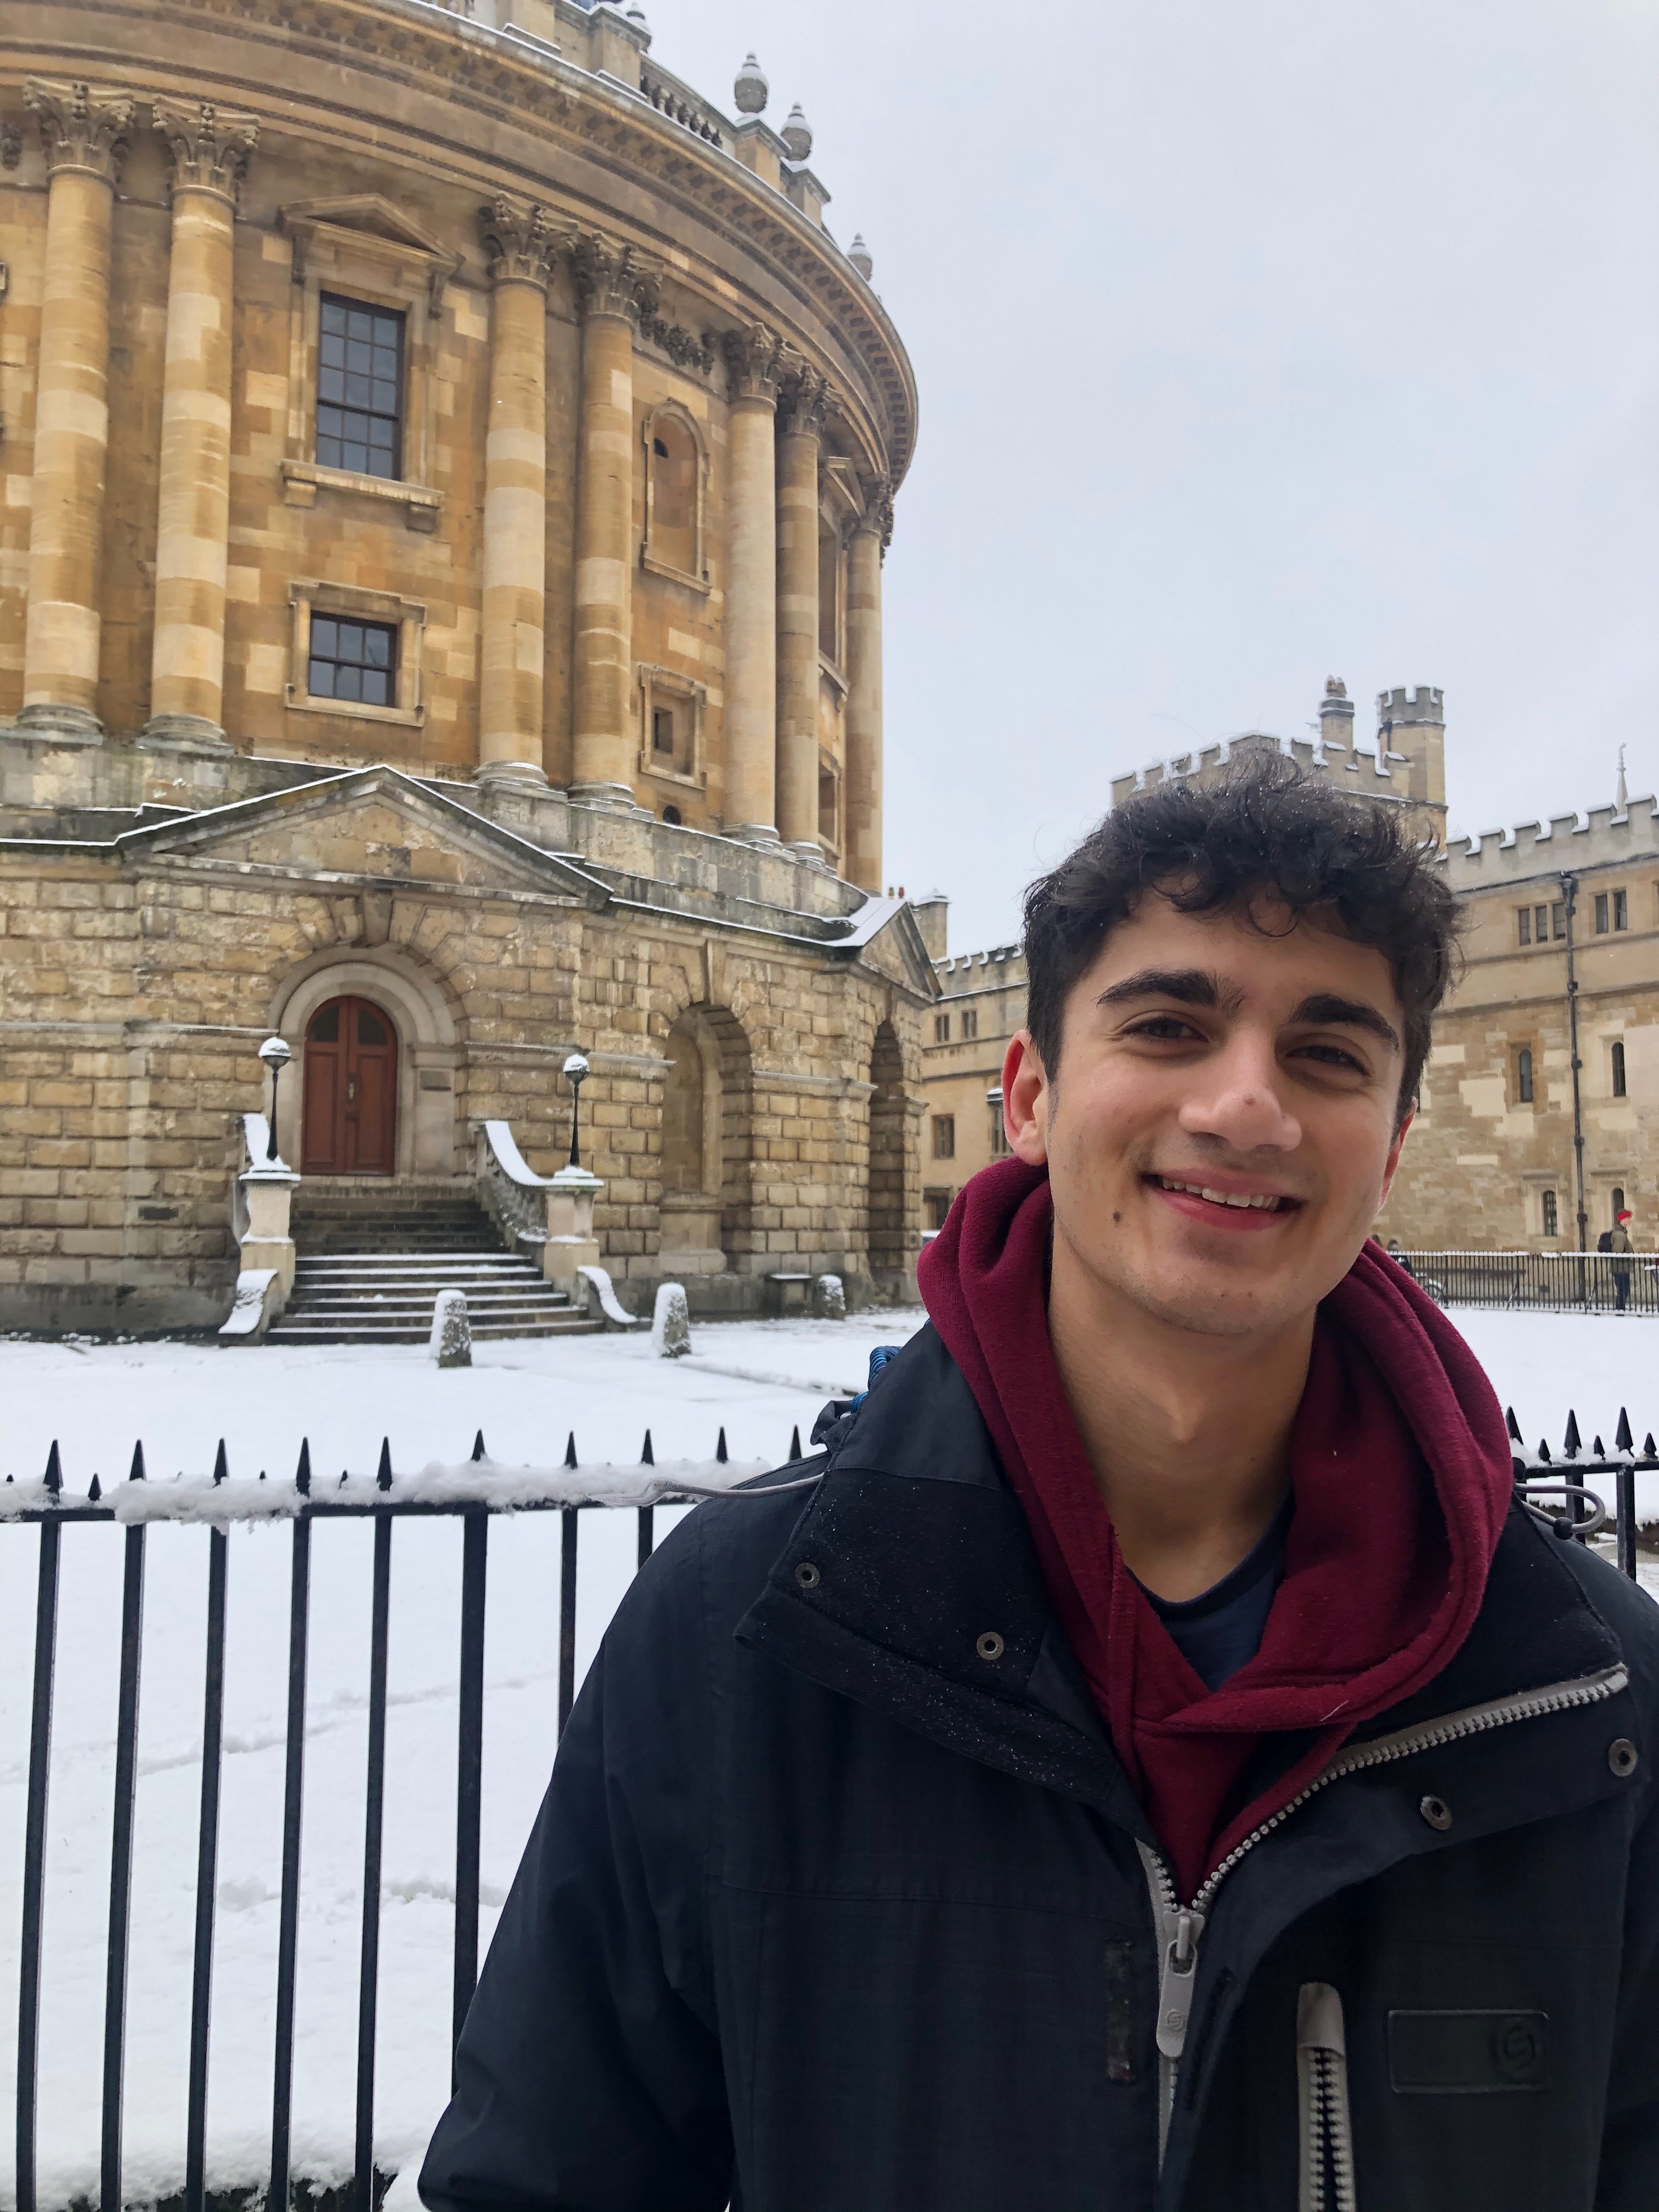 Luke in front of the Radcliffe Camera